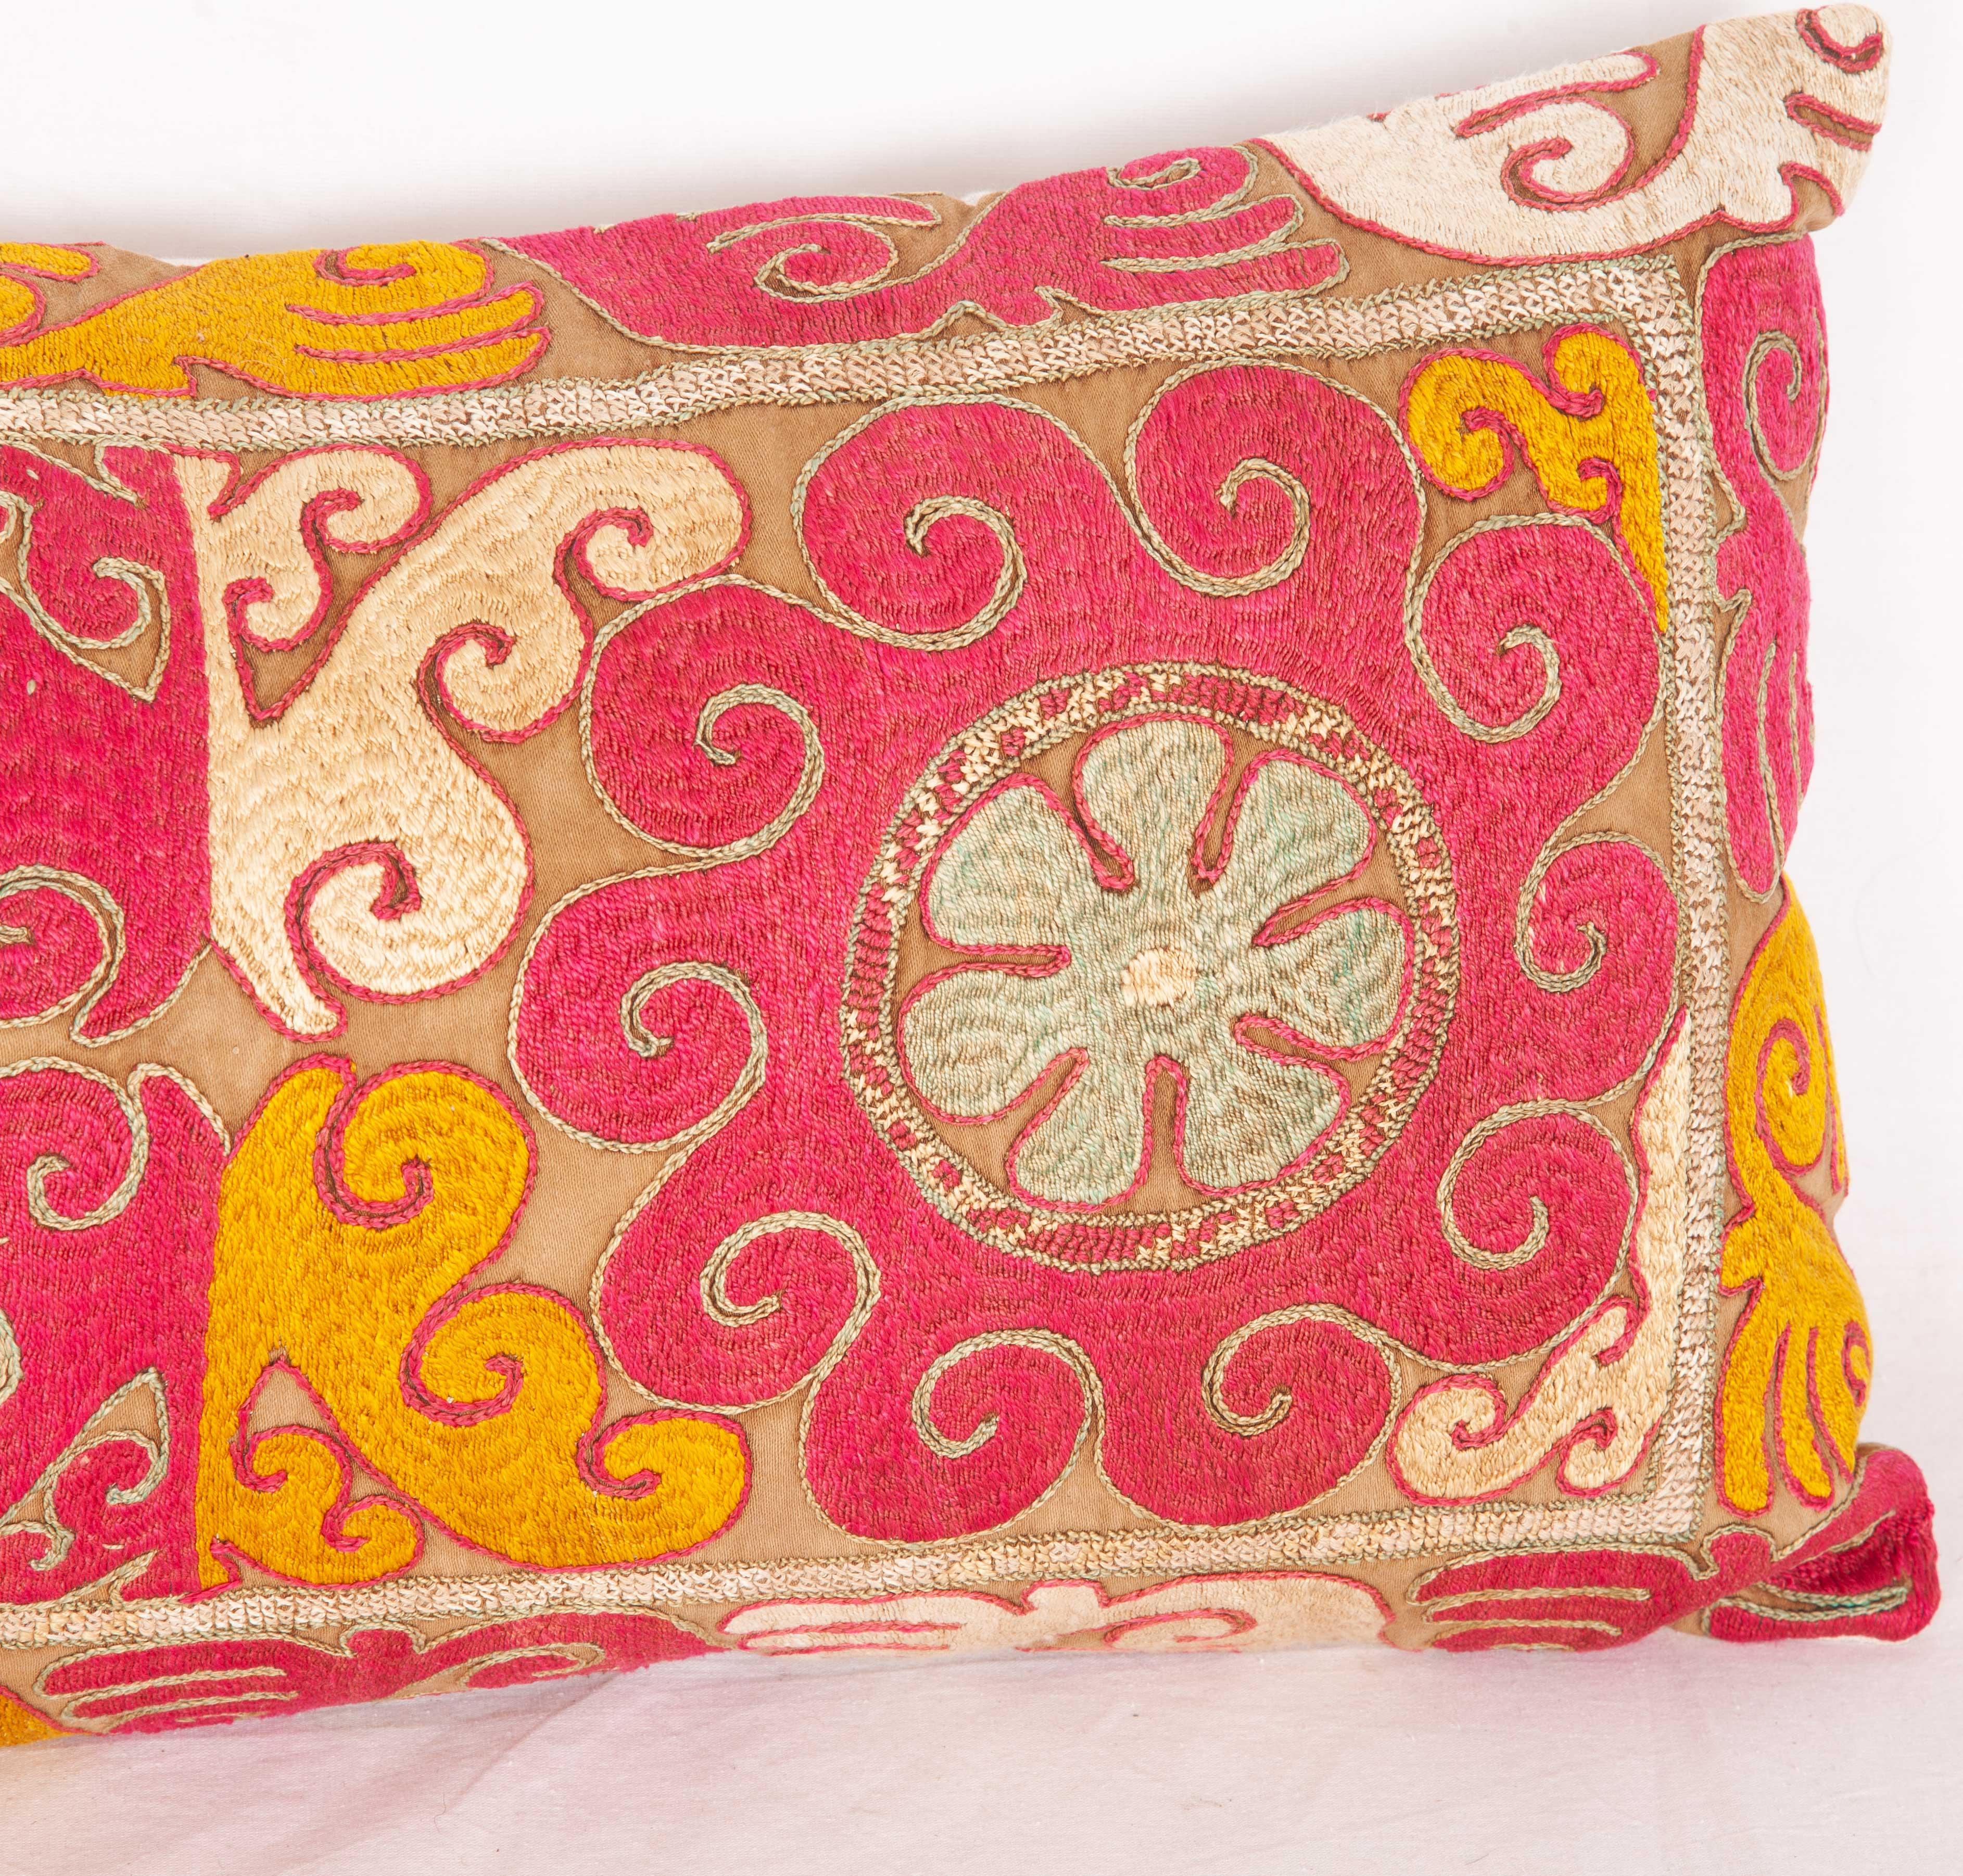 Lumbar Pillow Case Fashioned from an Uzbek Embroidered Mafrash Panel In Good Condition For Sale In Istanbul, TR